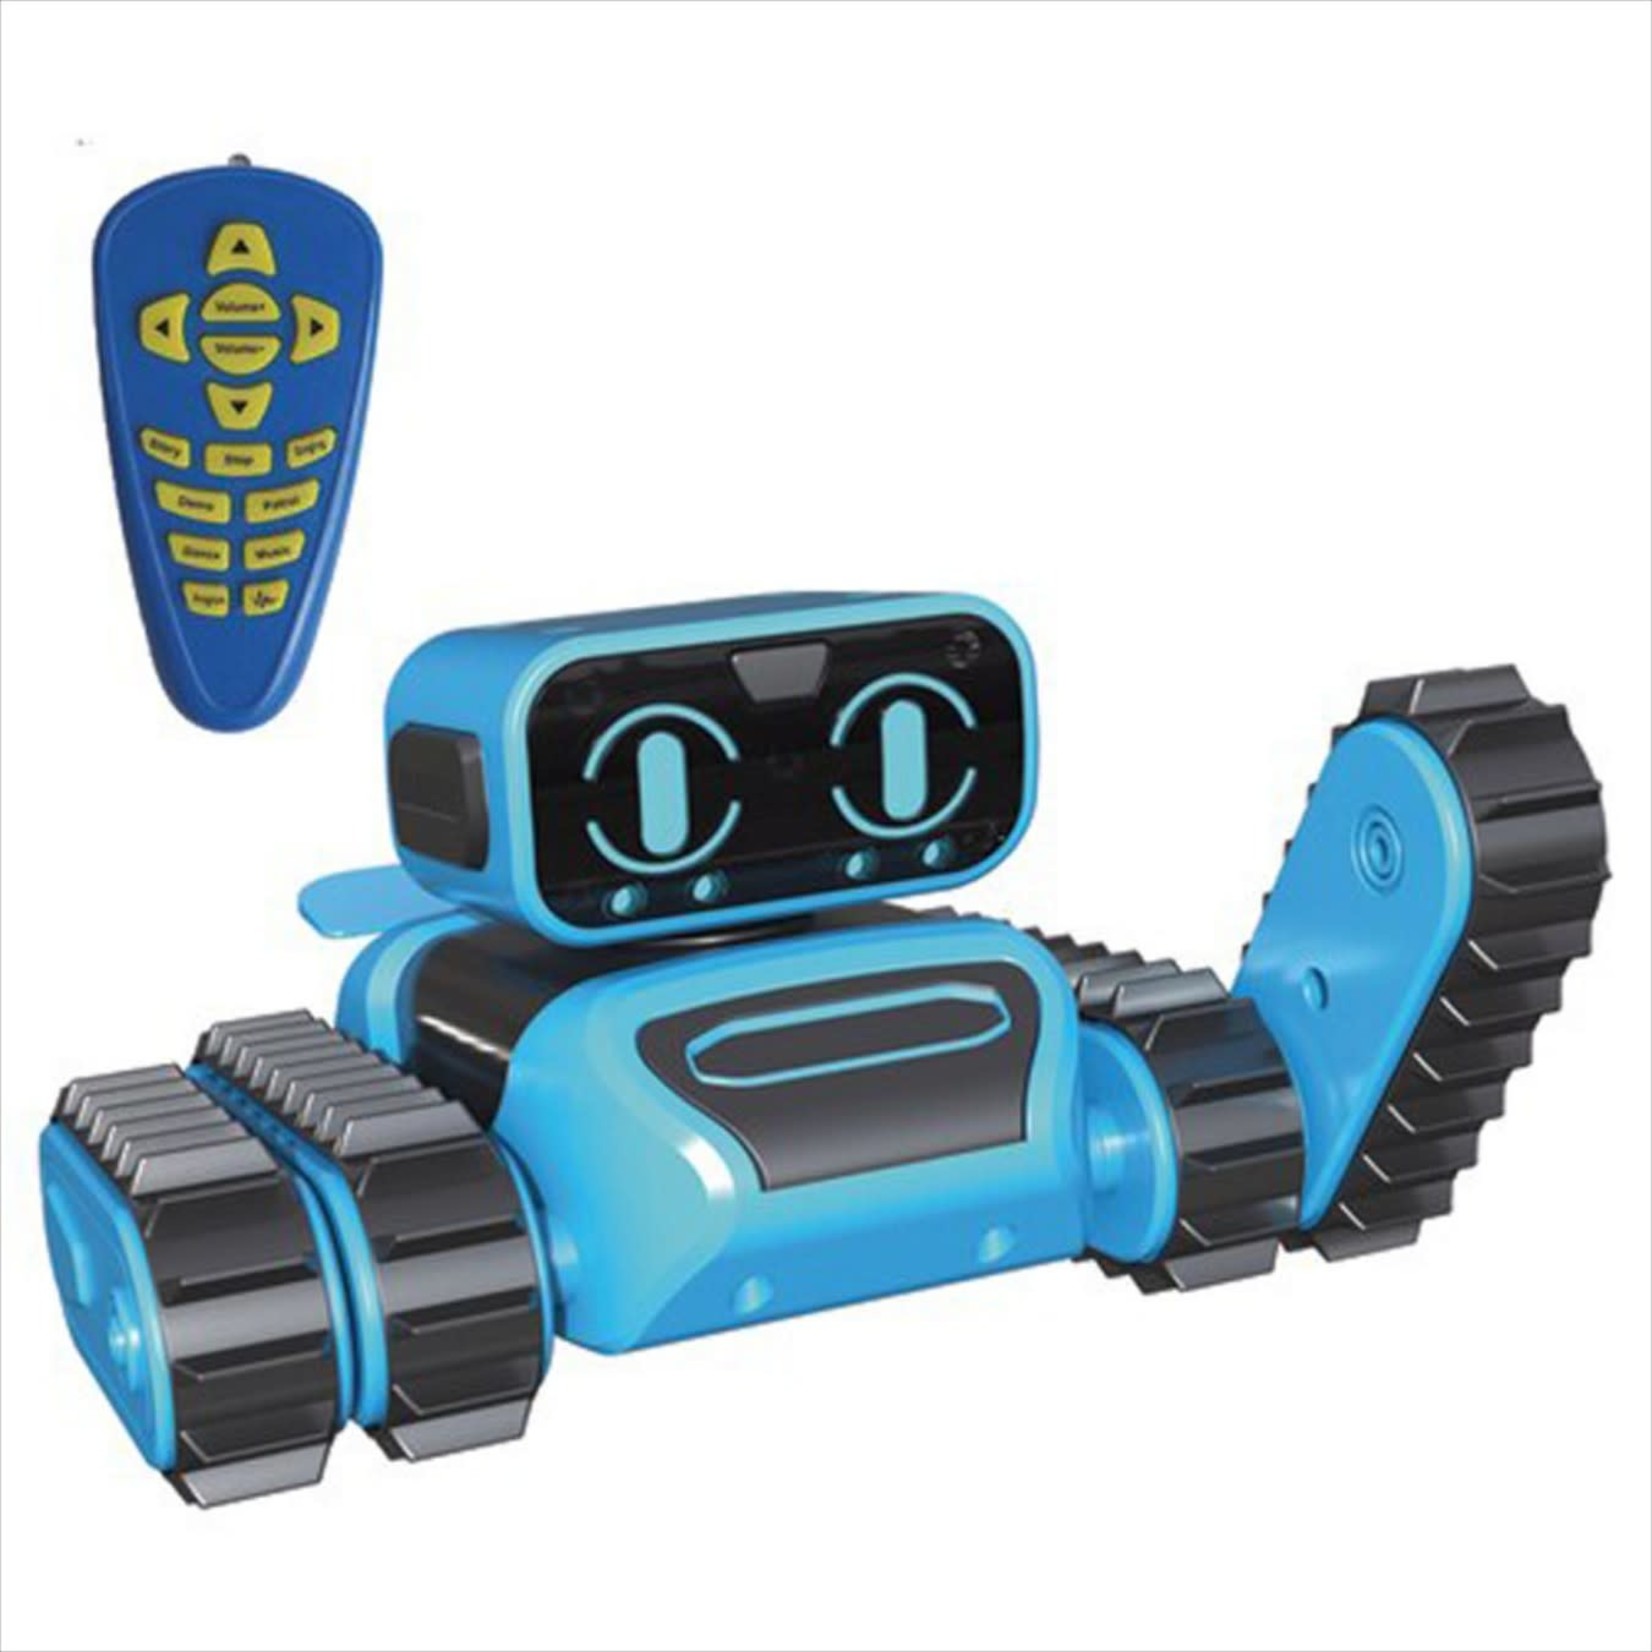 OWIKIT OWIKIT RE/CO ROBOT #OWI-997